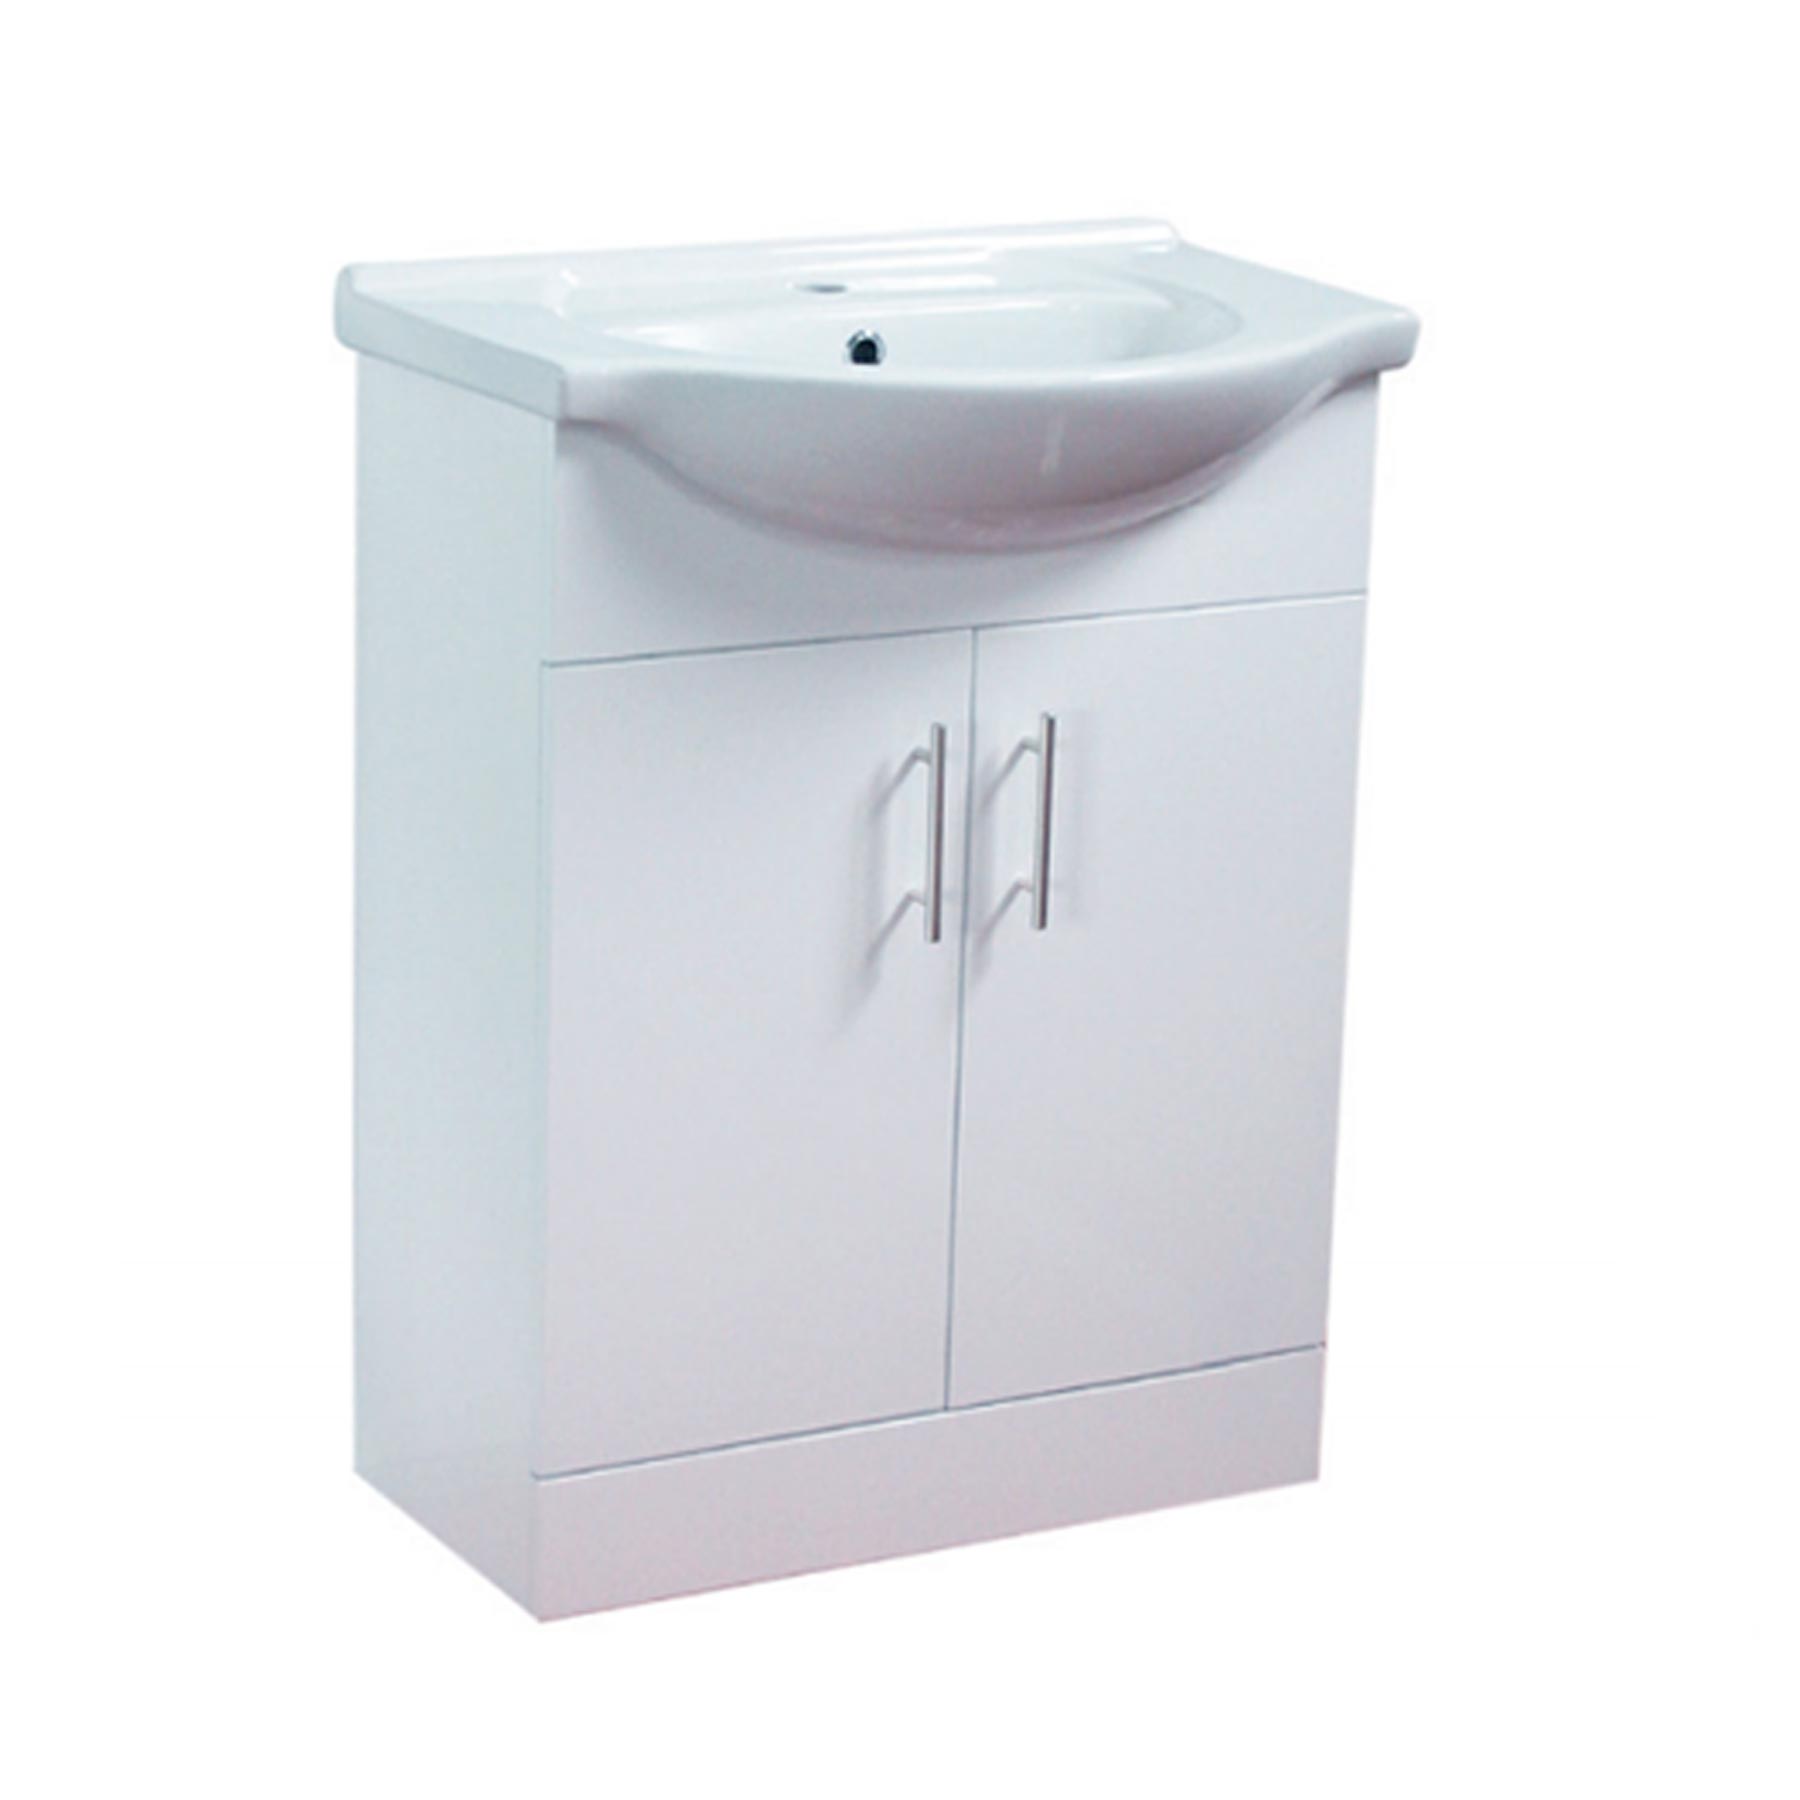 Glossy White Alpha Floor Bathroom Storage Cabinet with Minimal Assembly Required